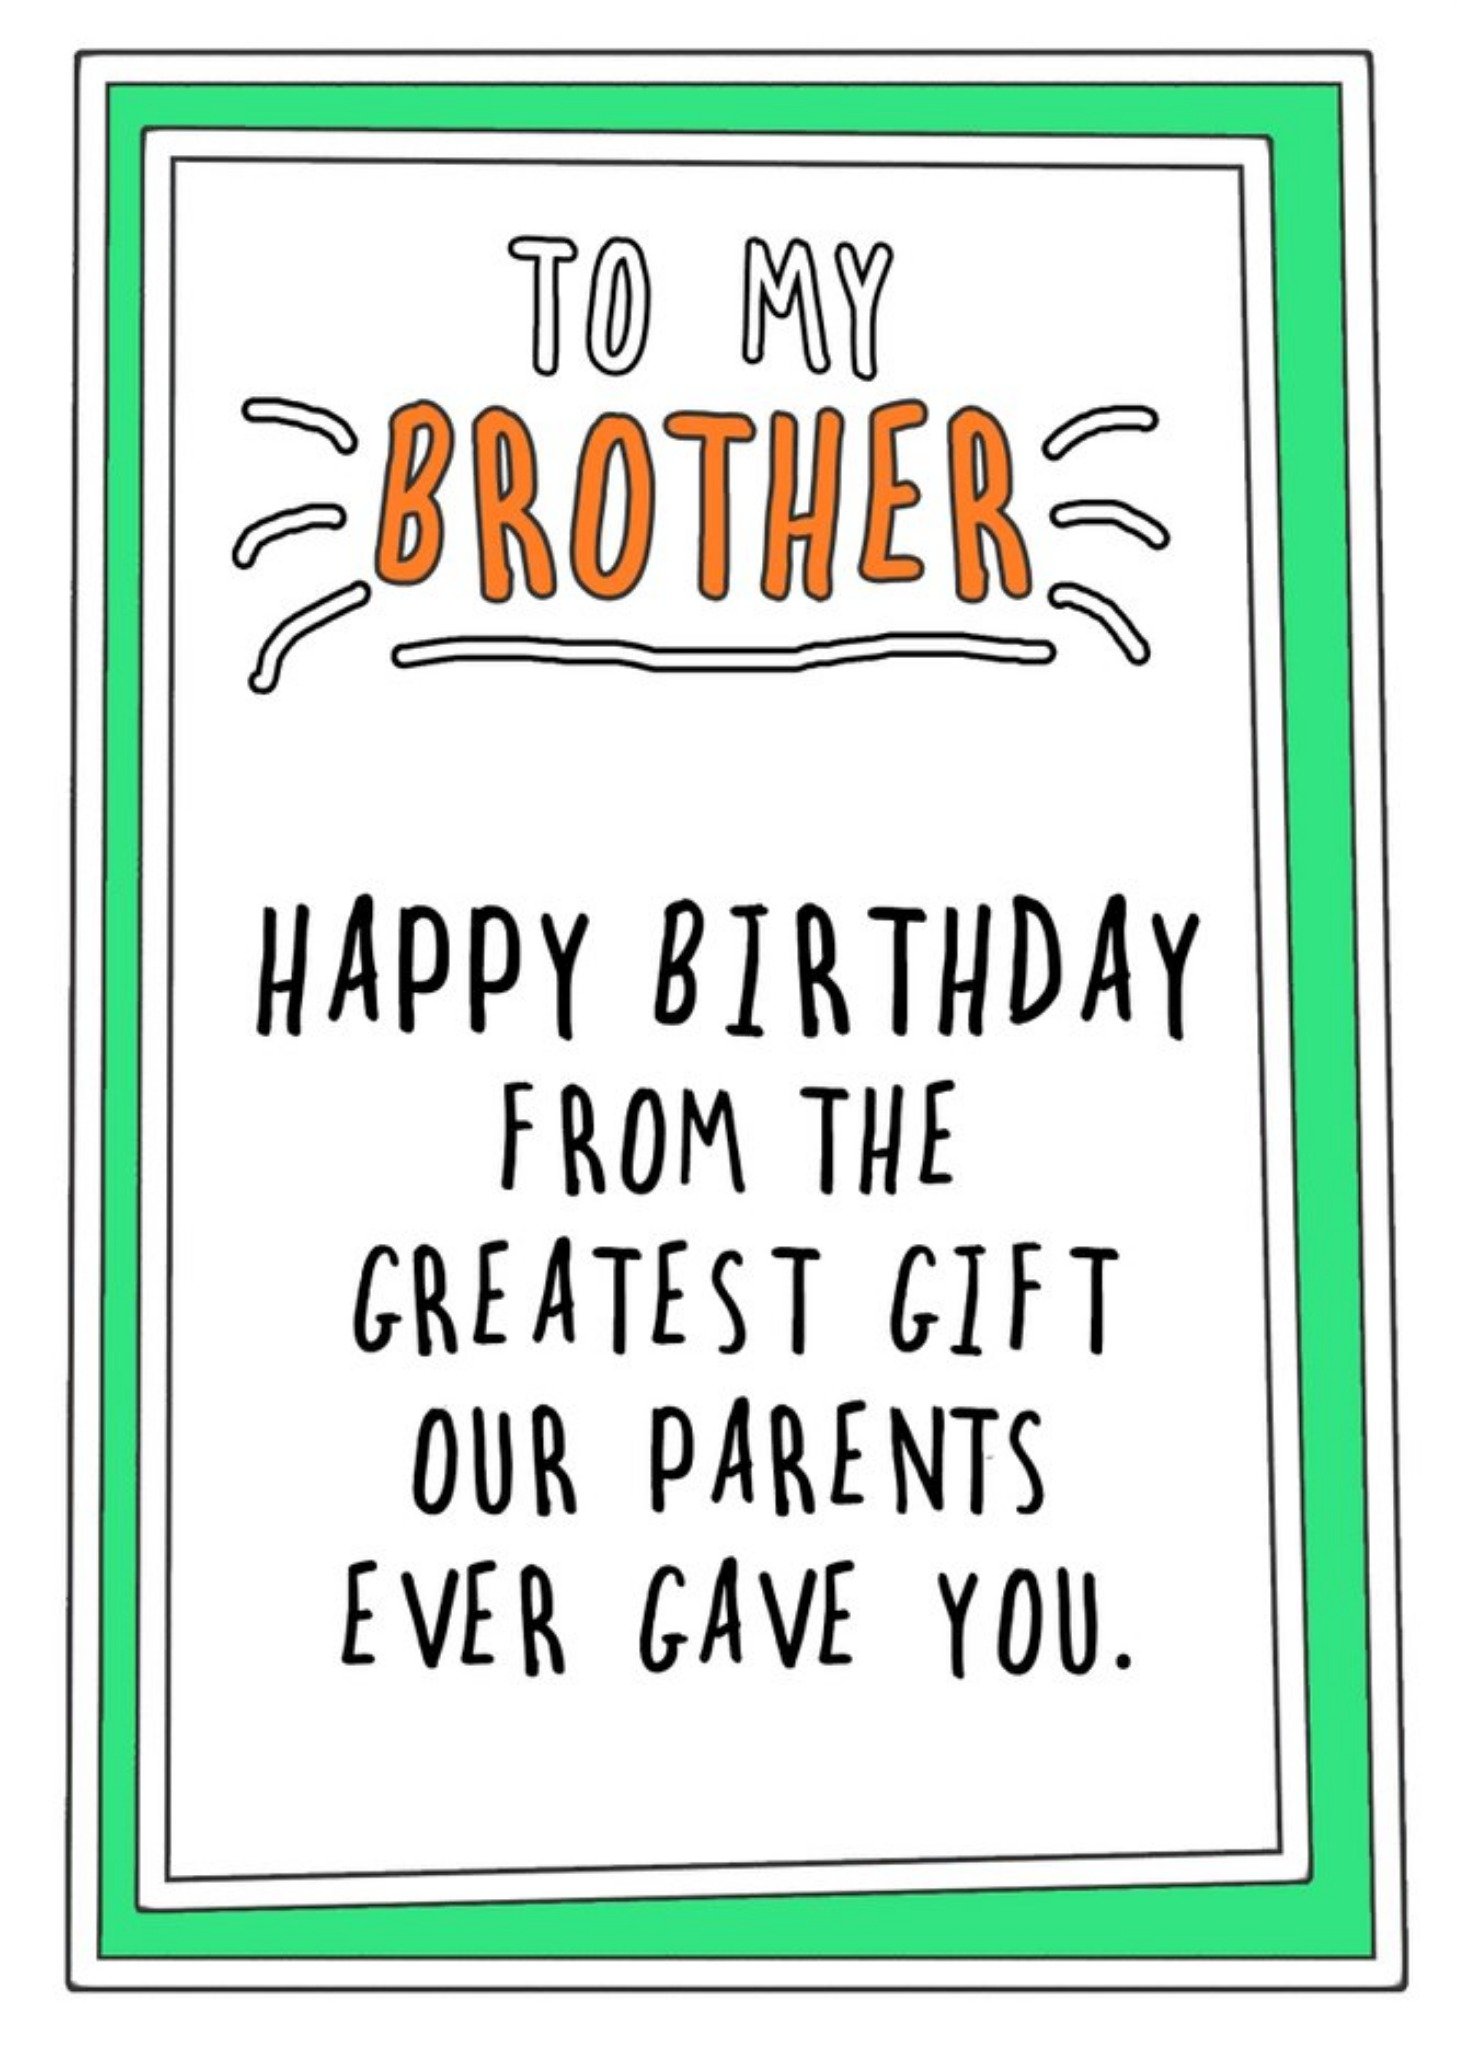 Go La La Humorous Handwritten Text With A Green Border Brother Birthday Card, Large